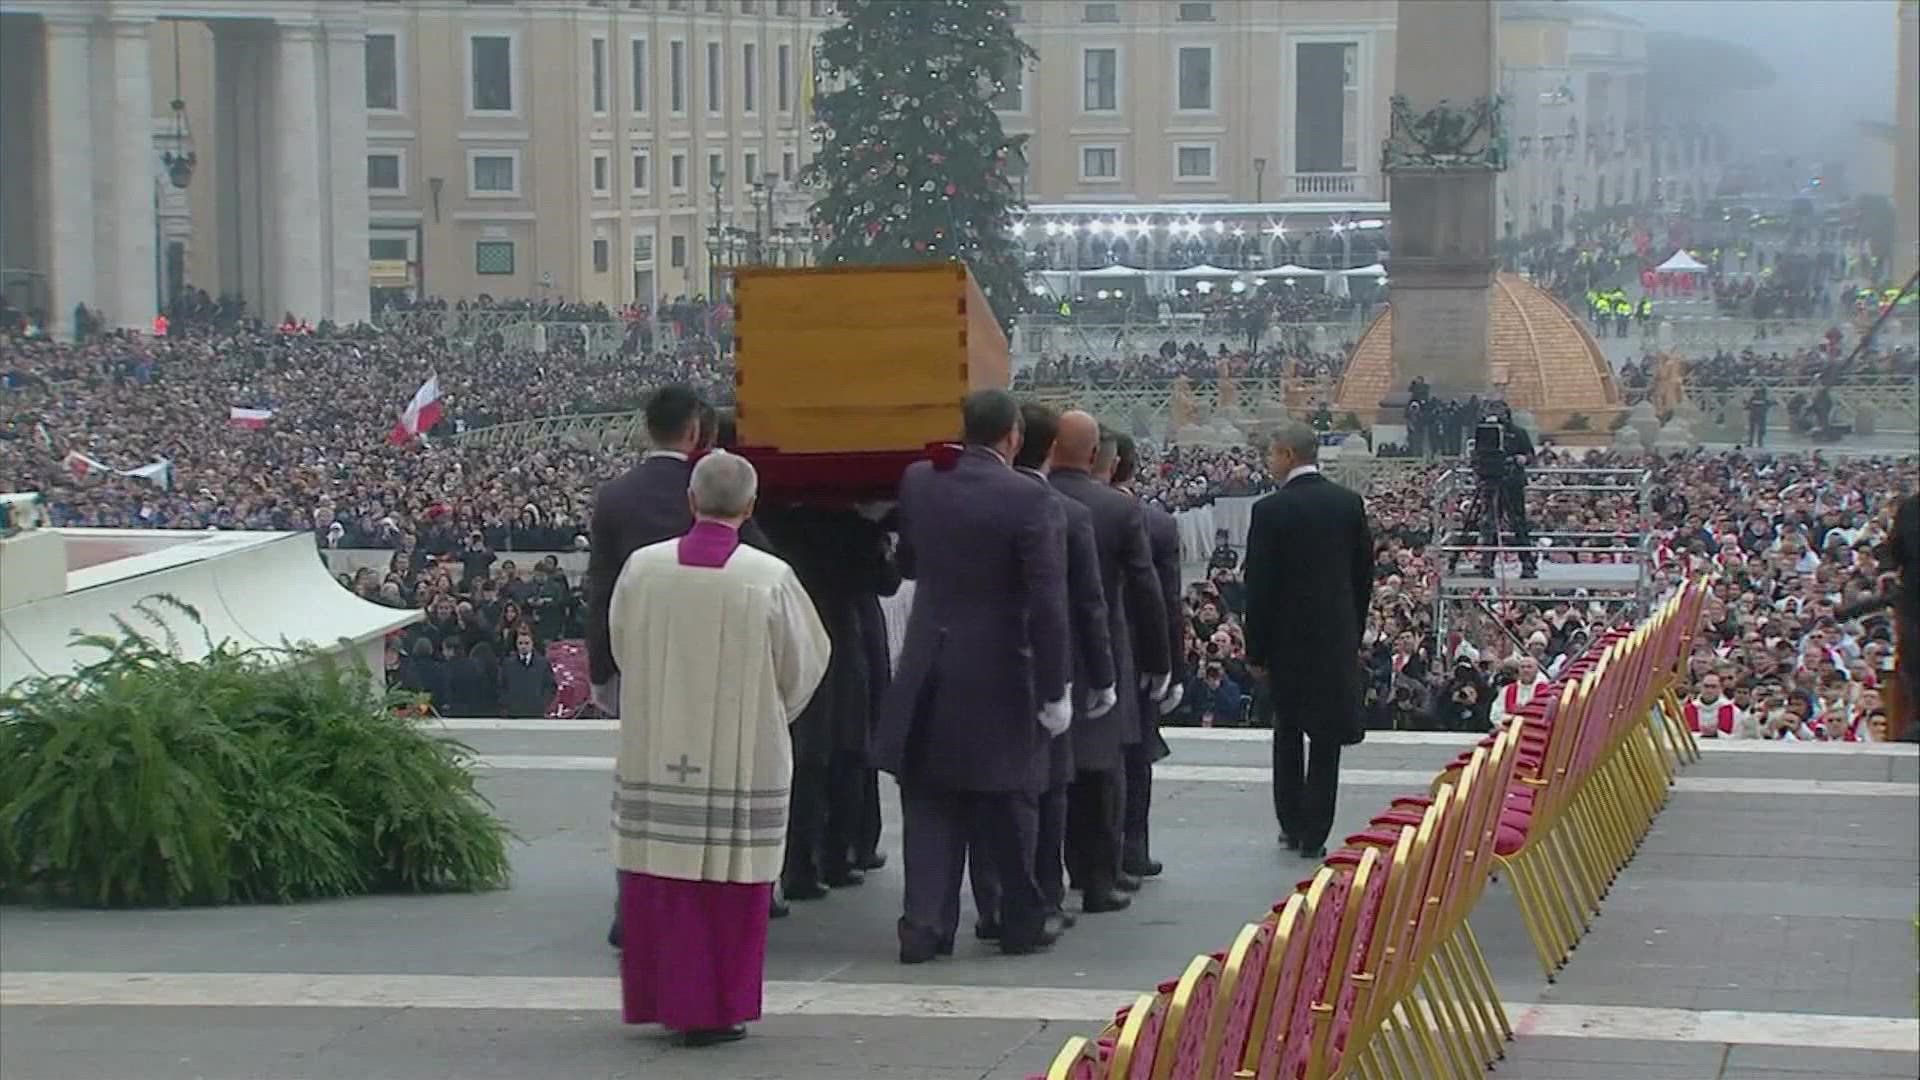 Mourners poured into St. Peter's Square, hoping to pay final respects to the pope who made history by retiring.